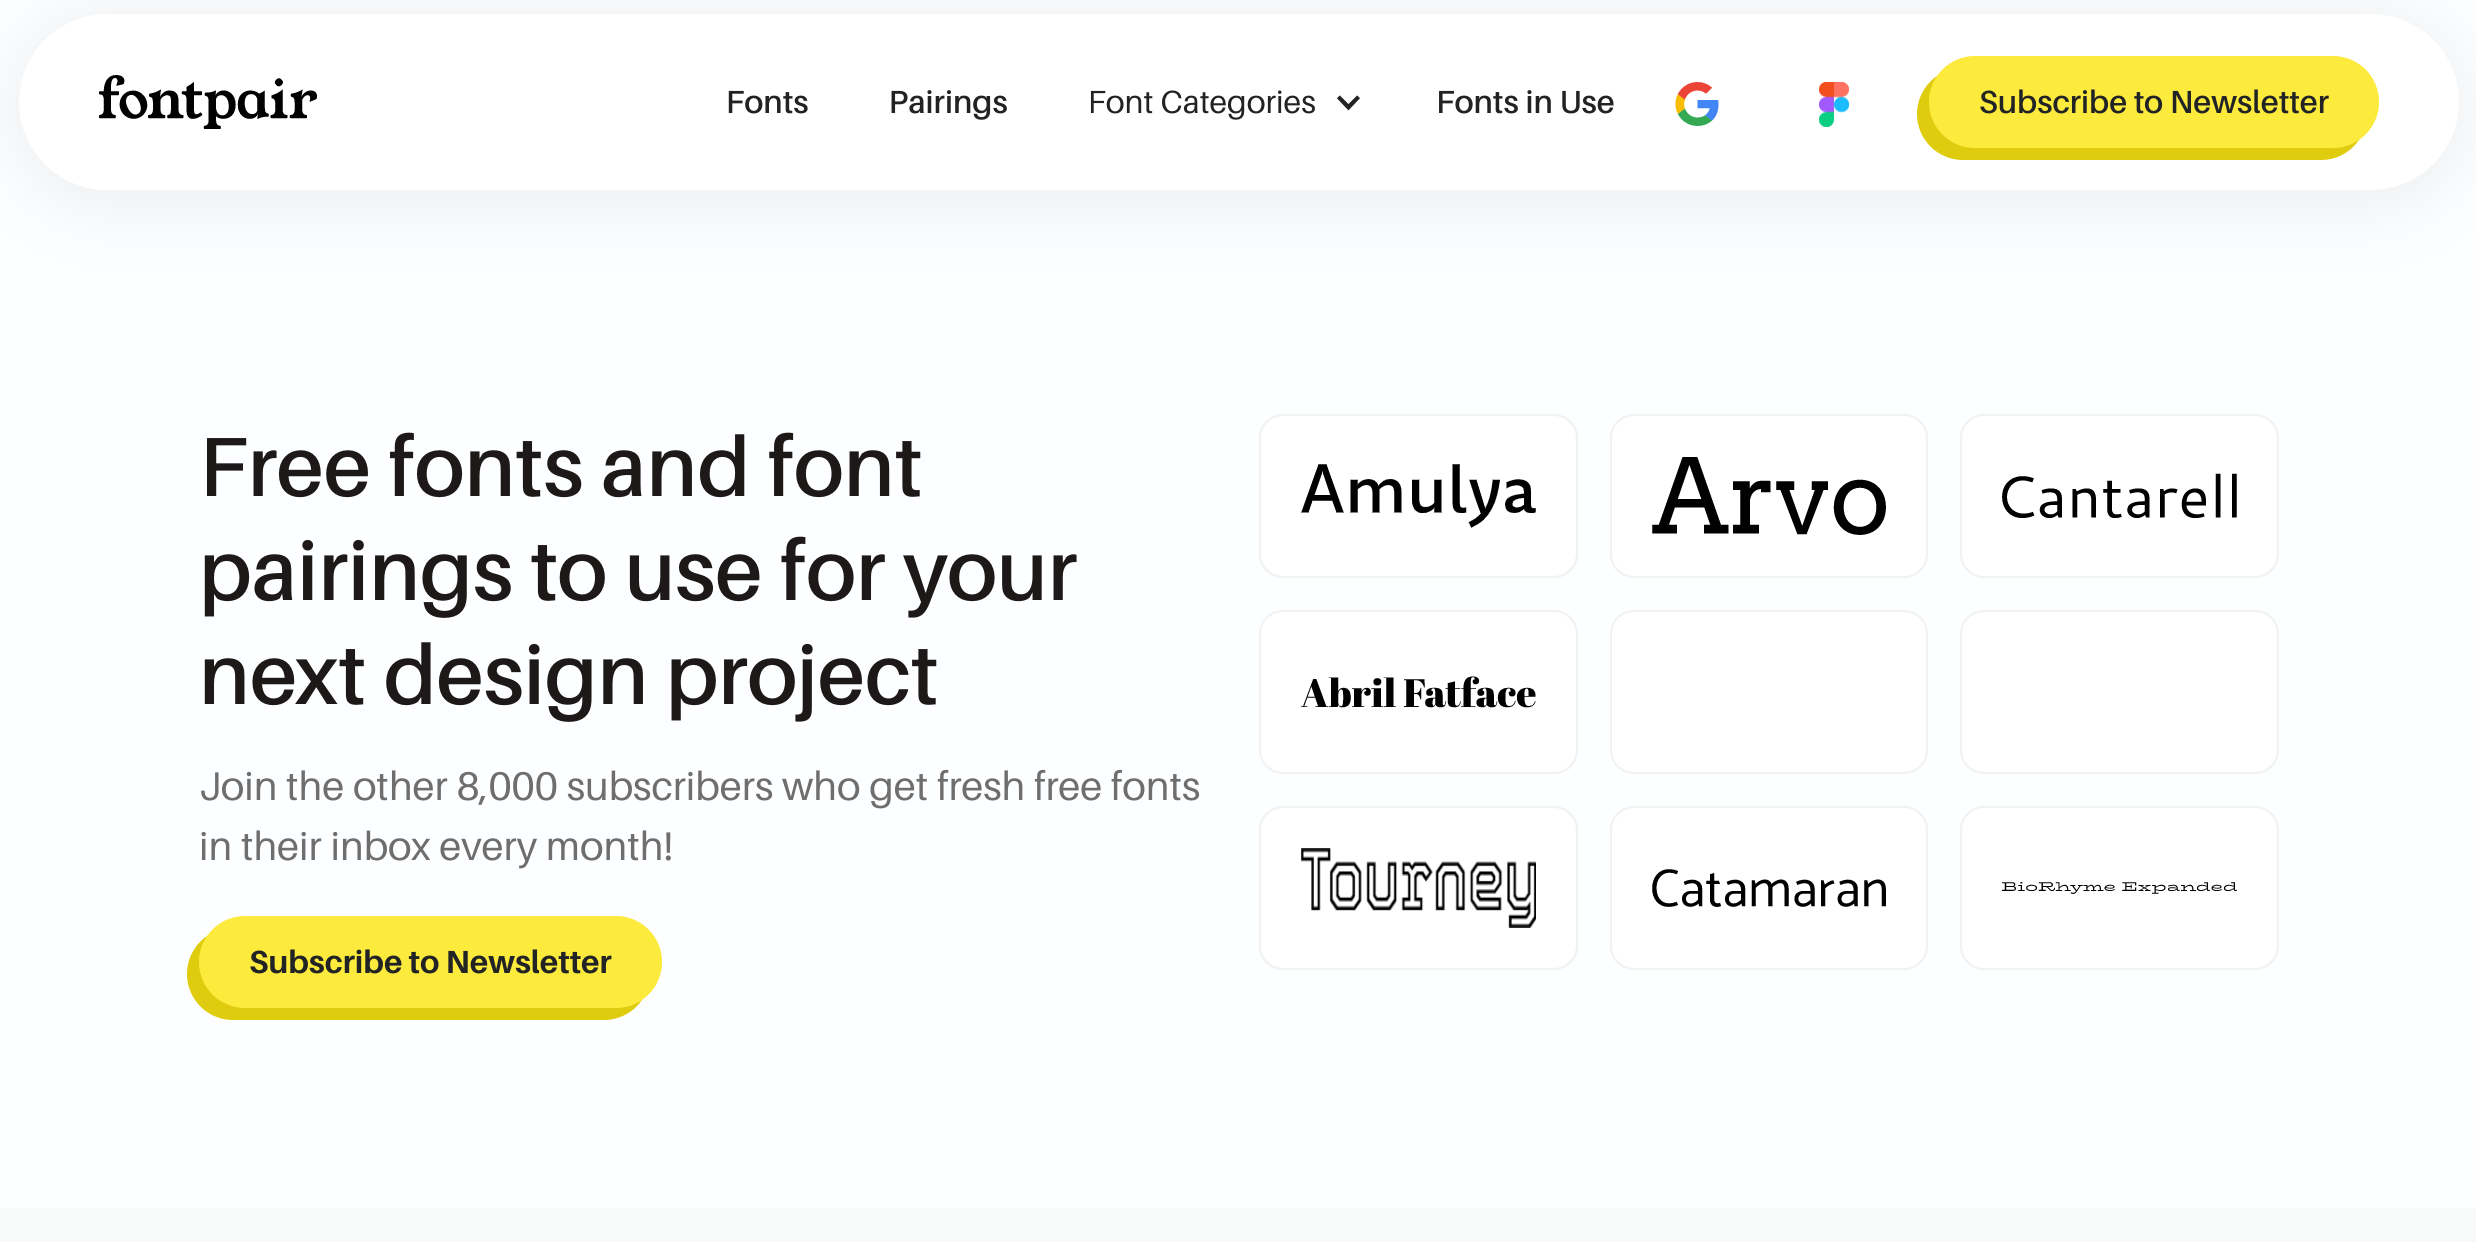 fontpair.co homepage